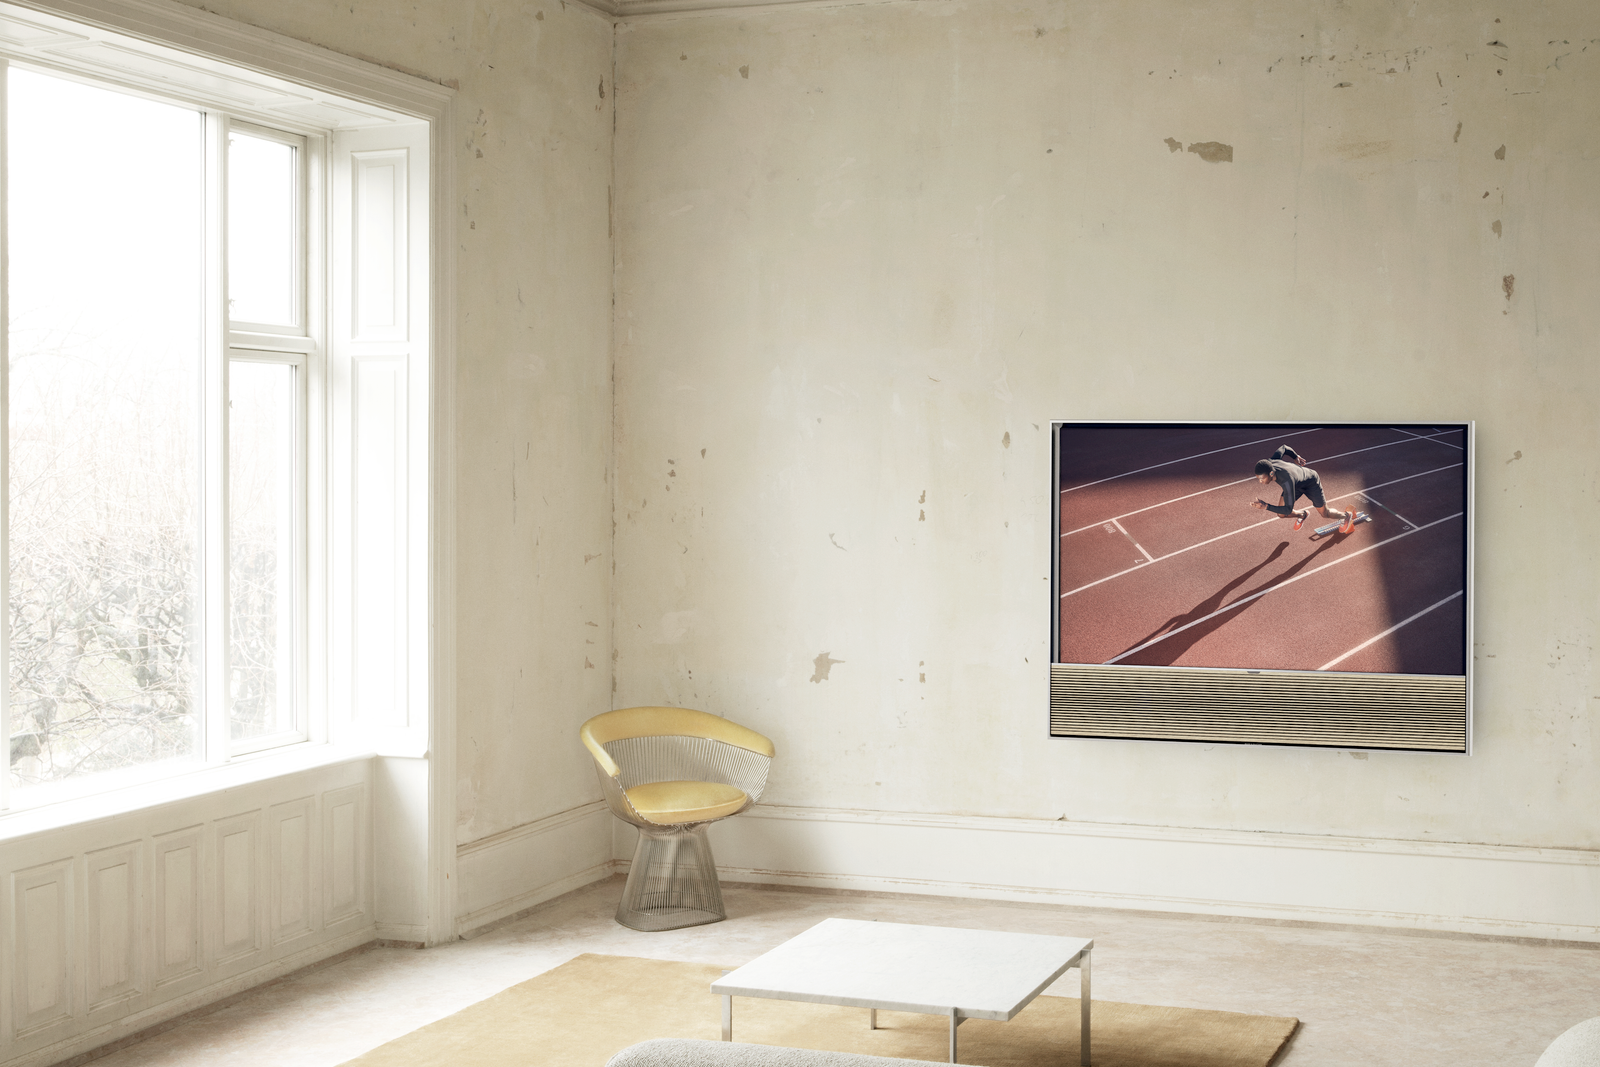 Bang & Olufsen expand its Beovision Contour TV range with a 'compact' 55